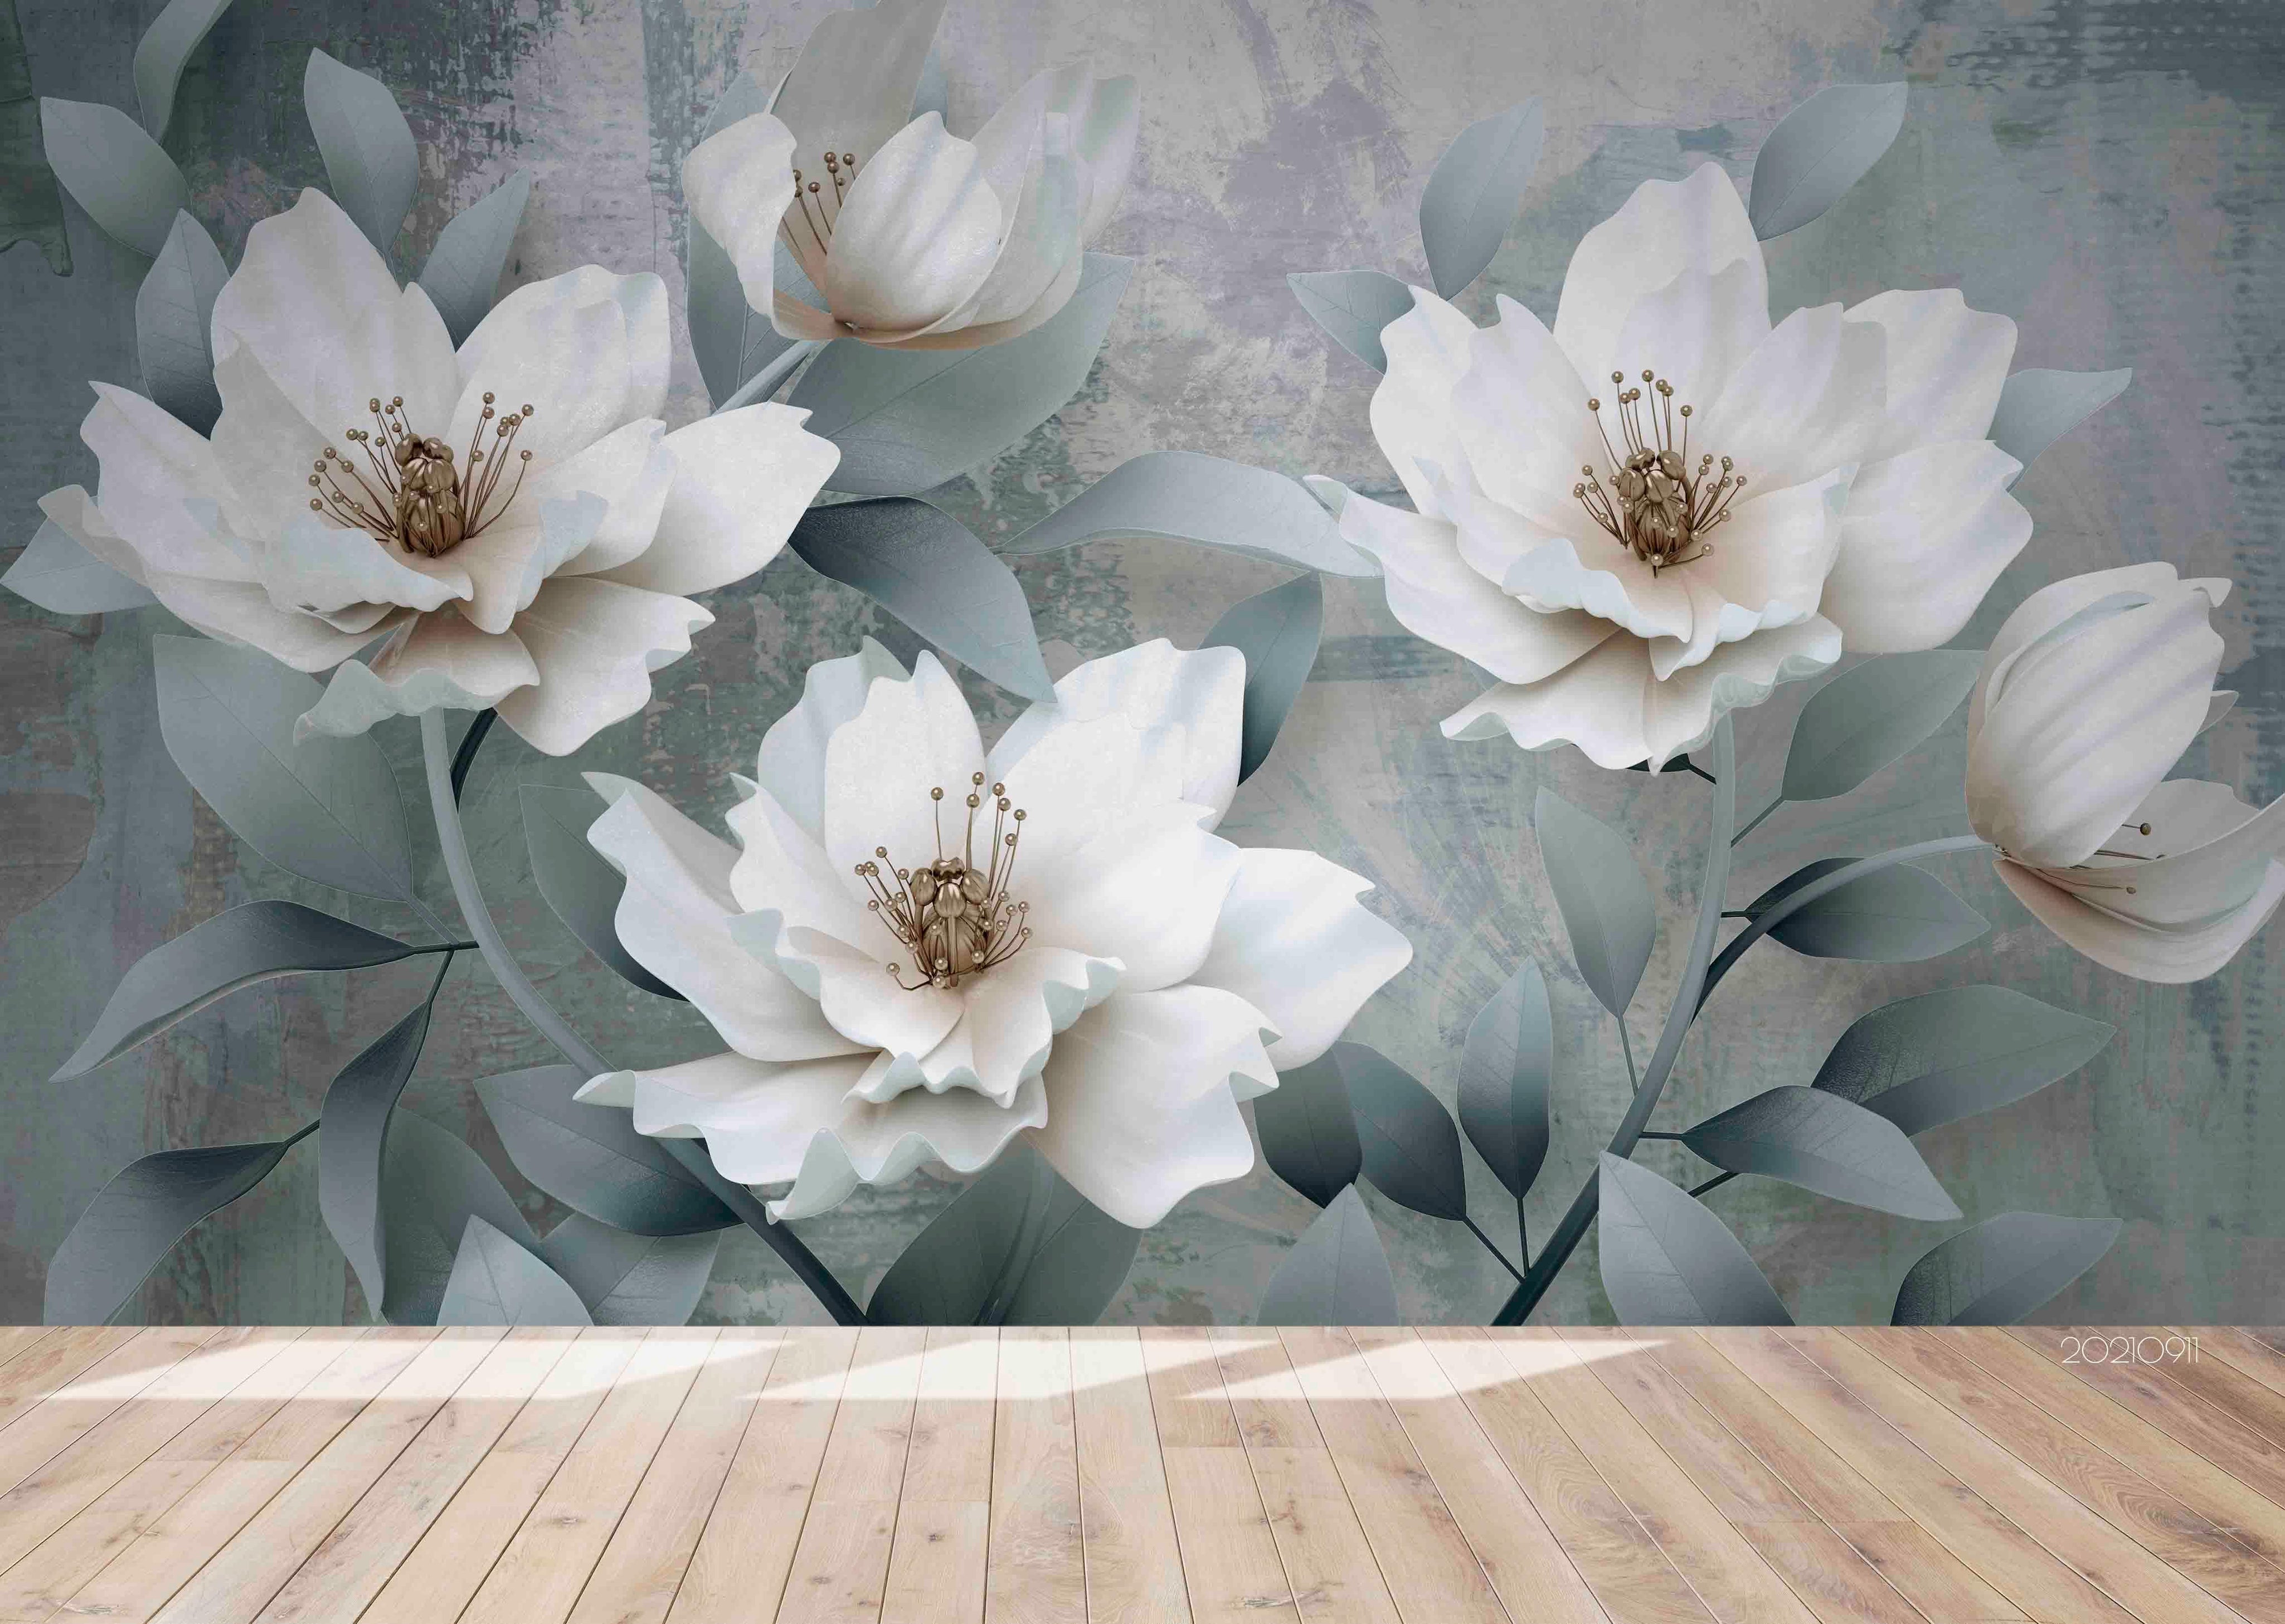 3D Hand Drawn Floral Leaves Wall Mural Wallpaper LQH 735- Jess Art Decoration